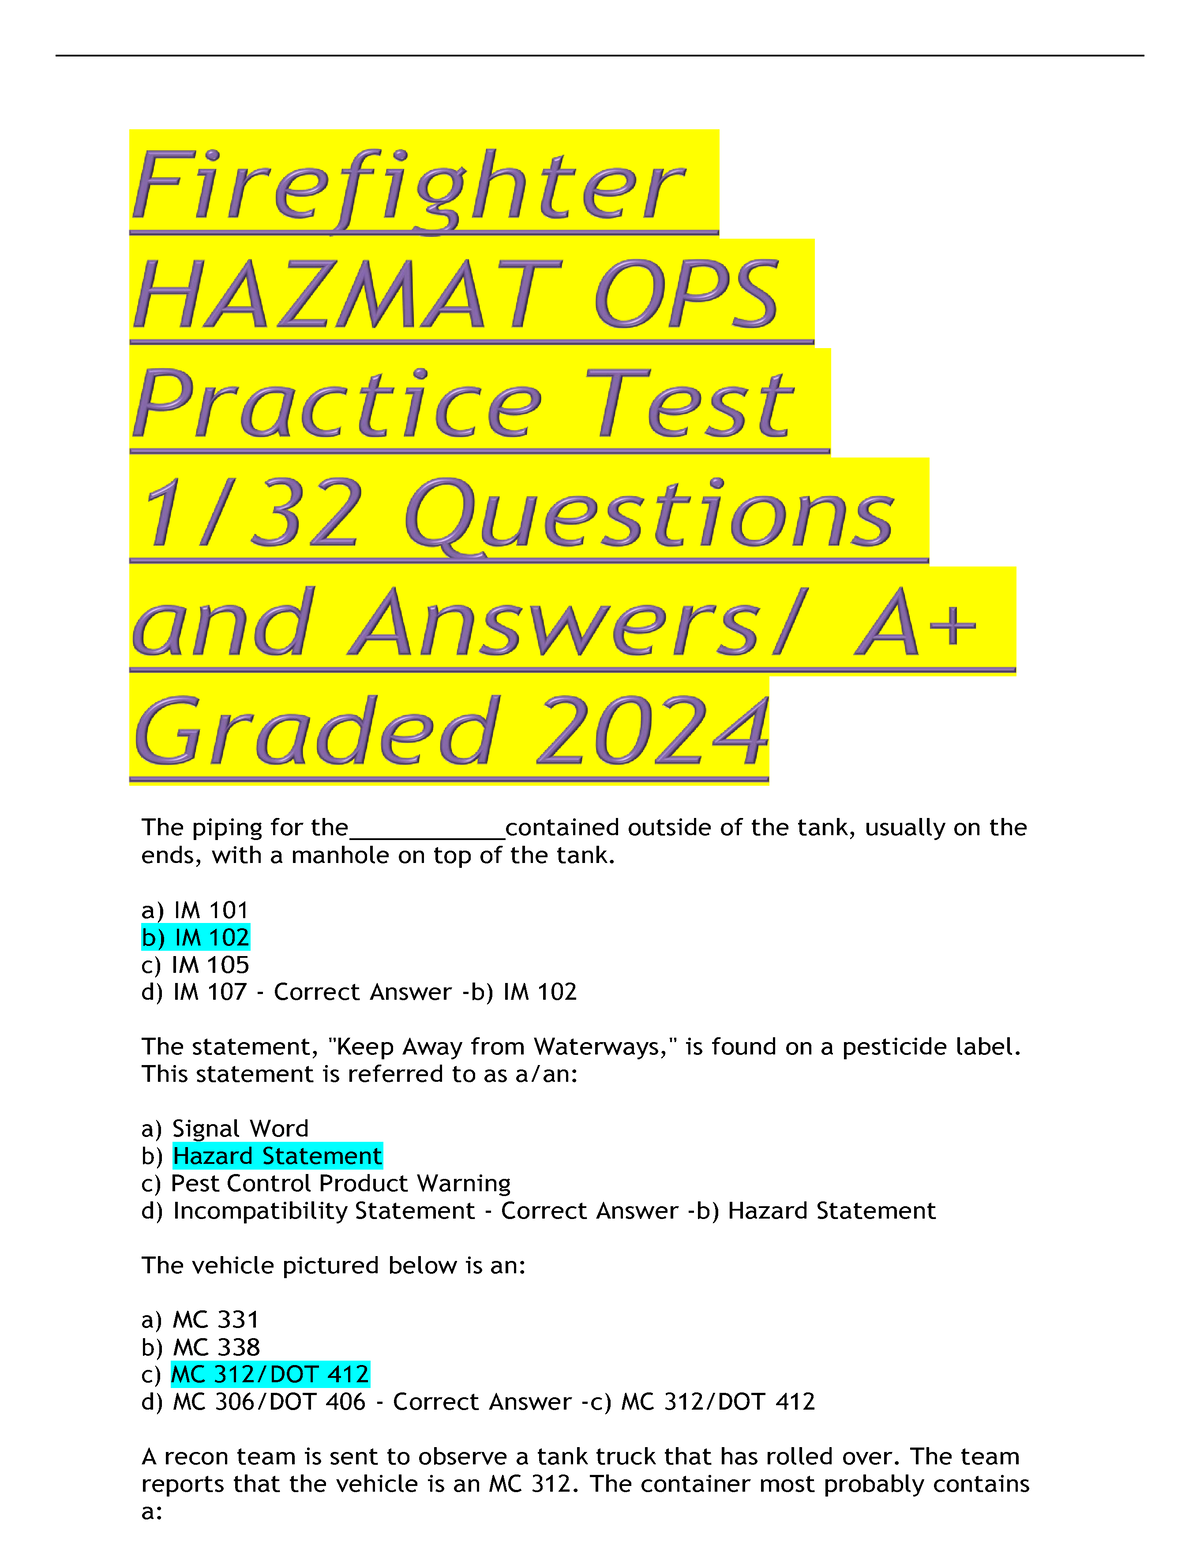 Firefighter Hazmat OPS Practice Test 132 Questions and Answers A+